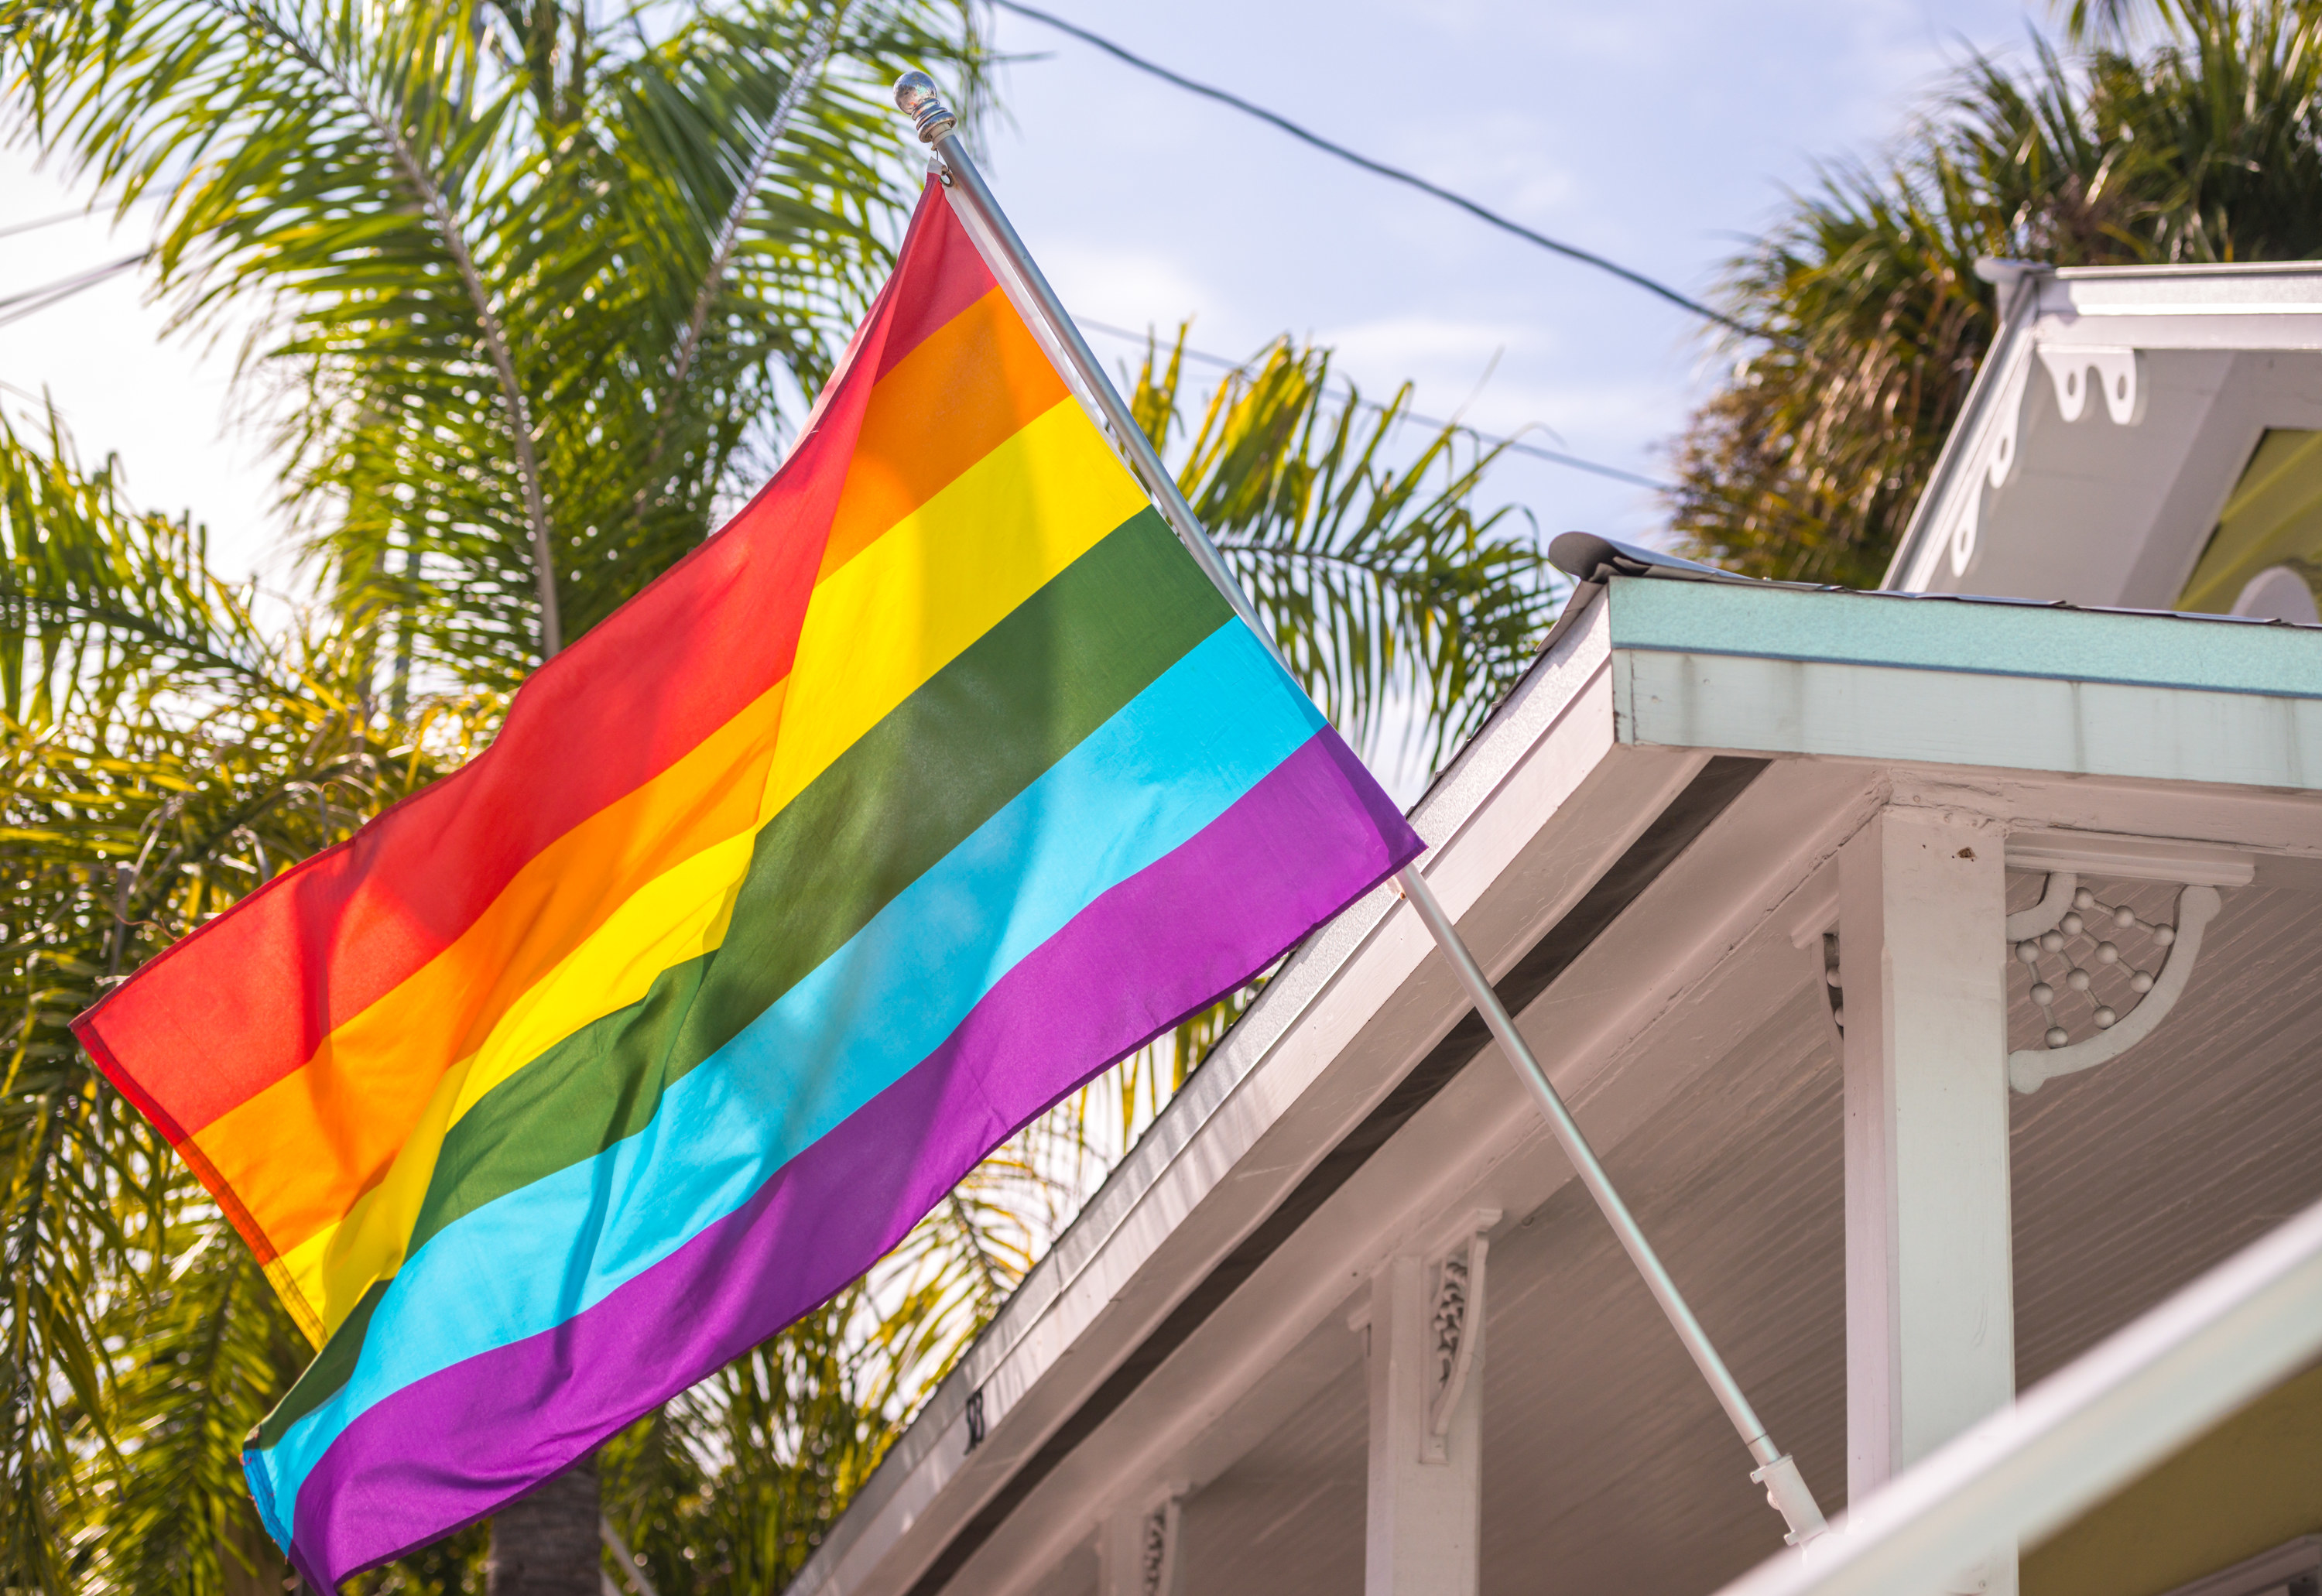 A pride flag hanging outside a house